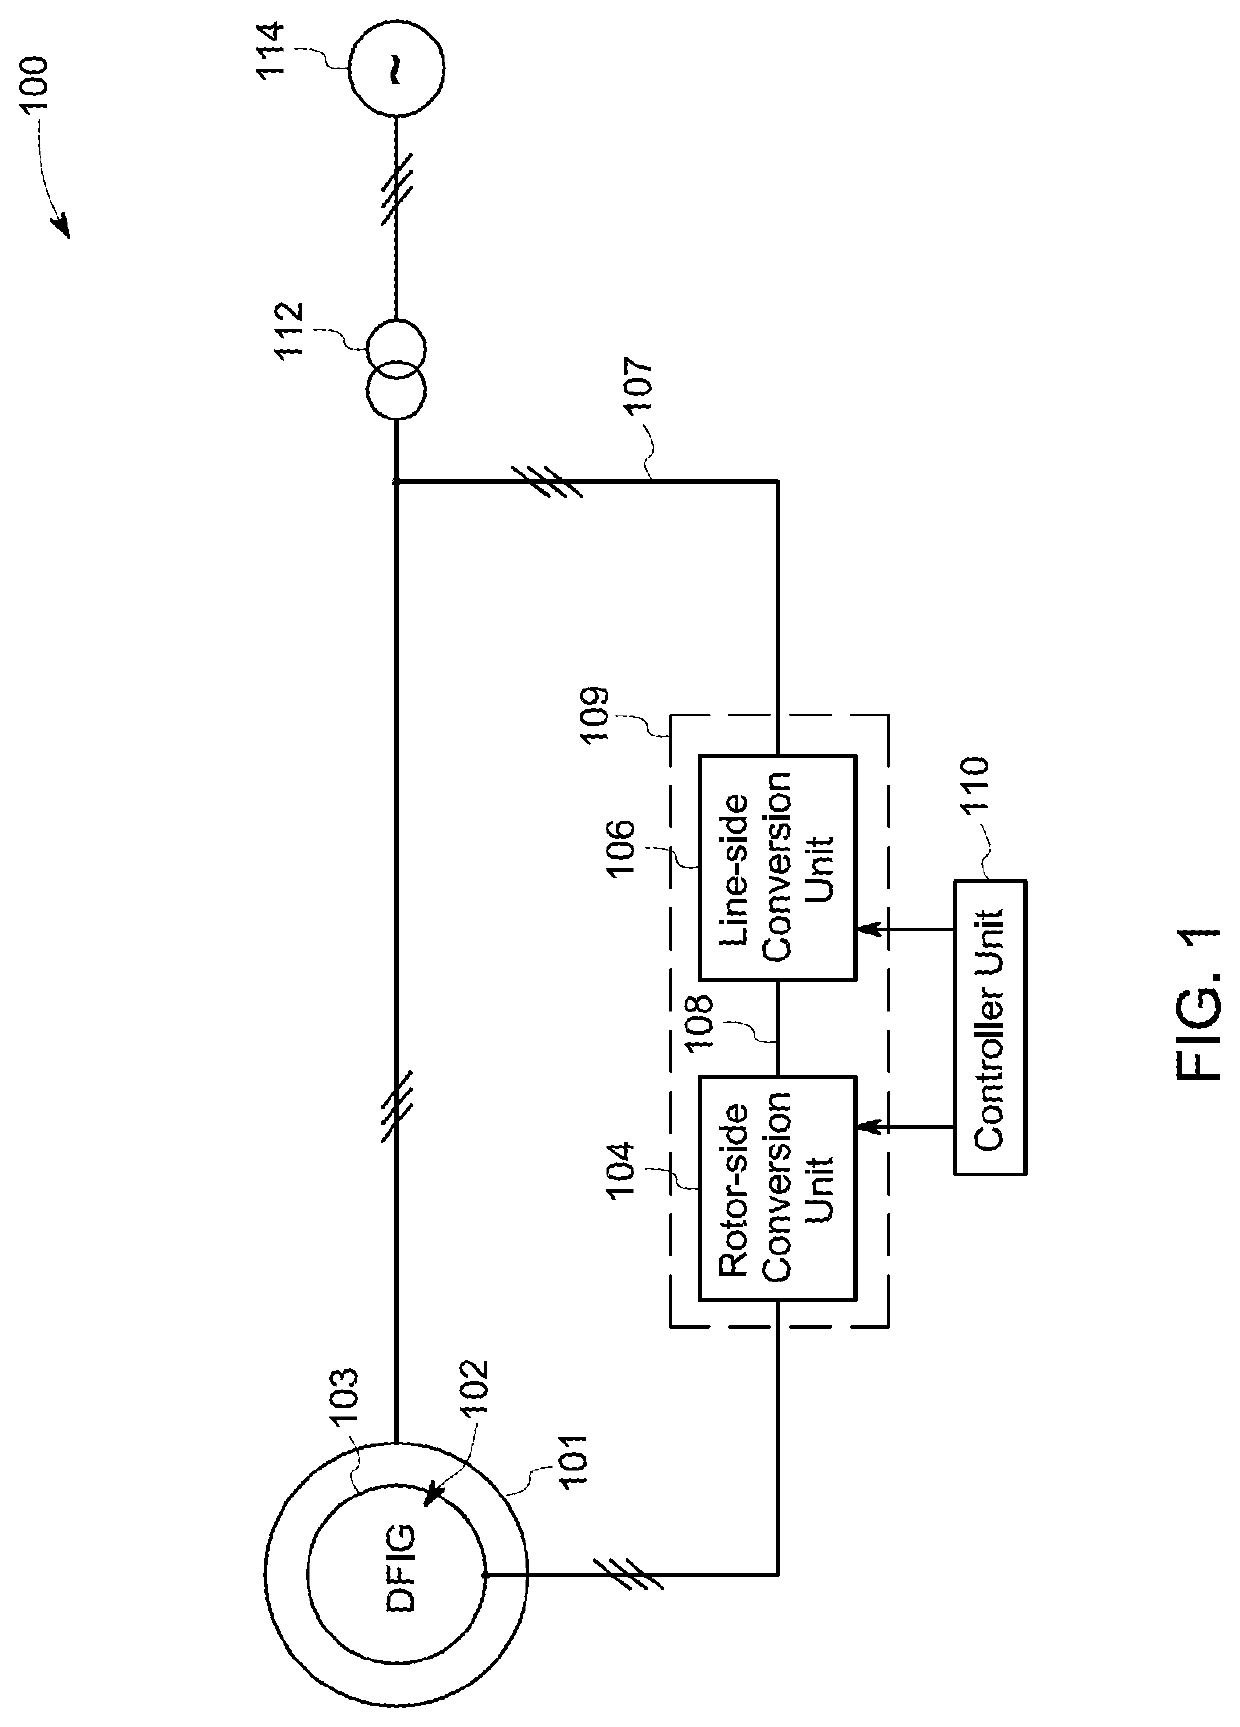 Power conversion systems and associated methods